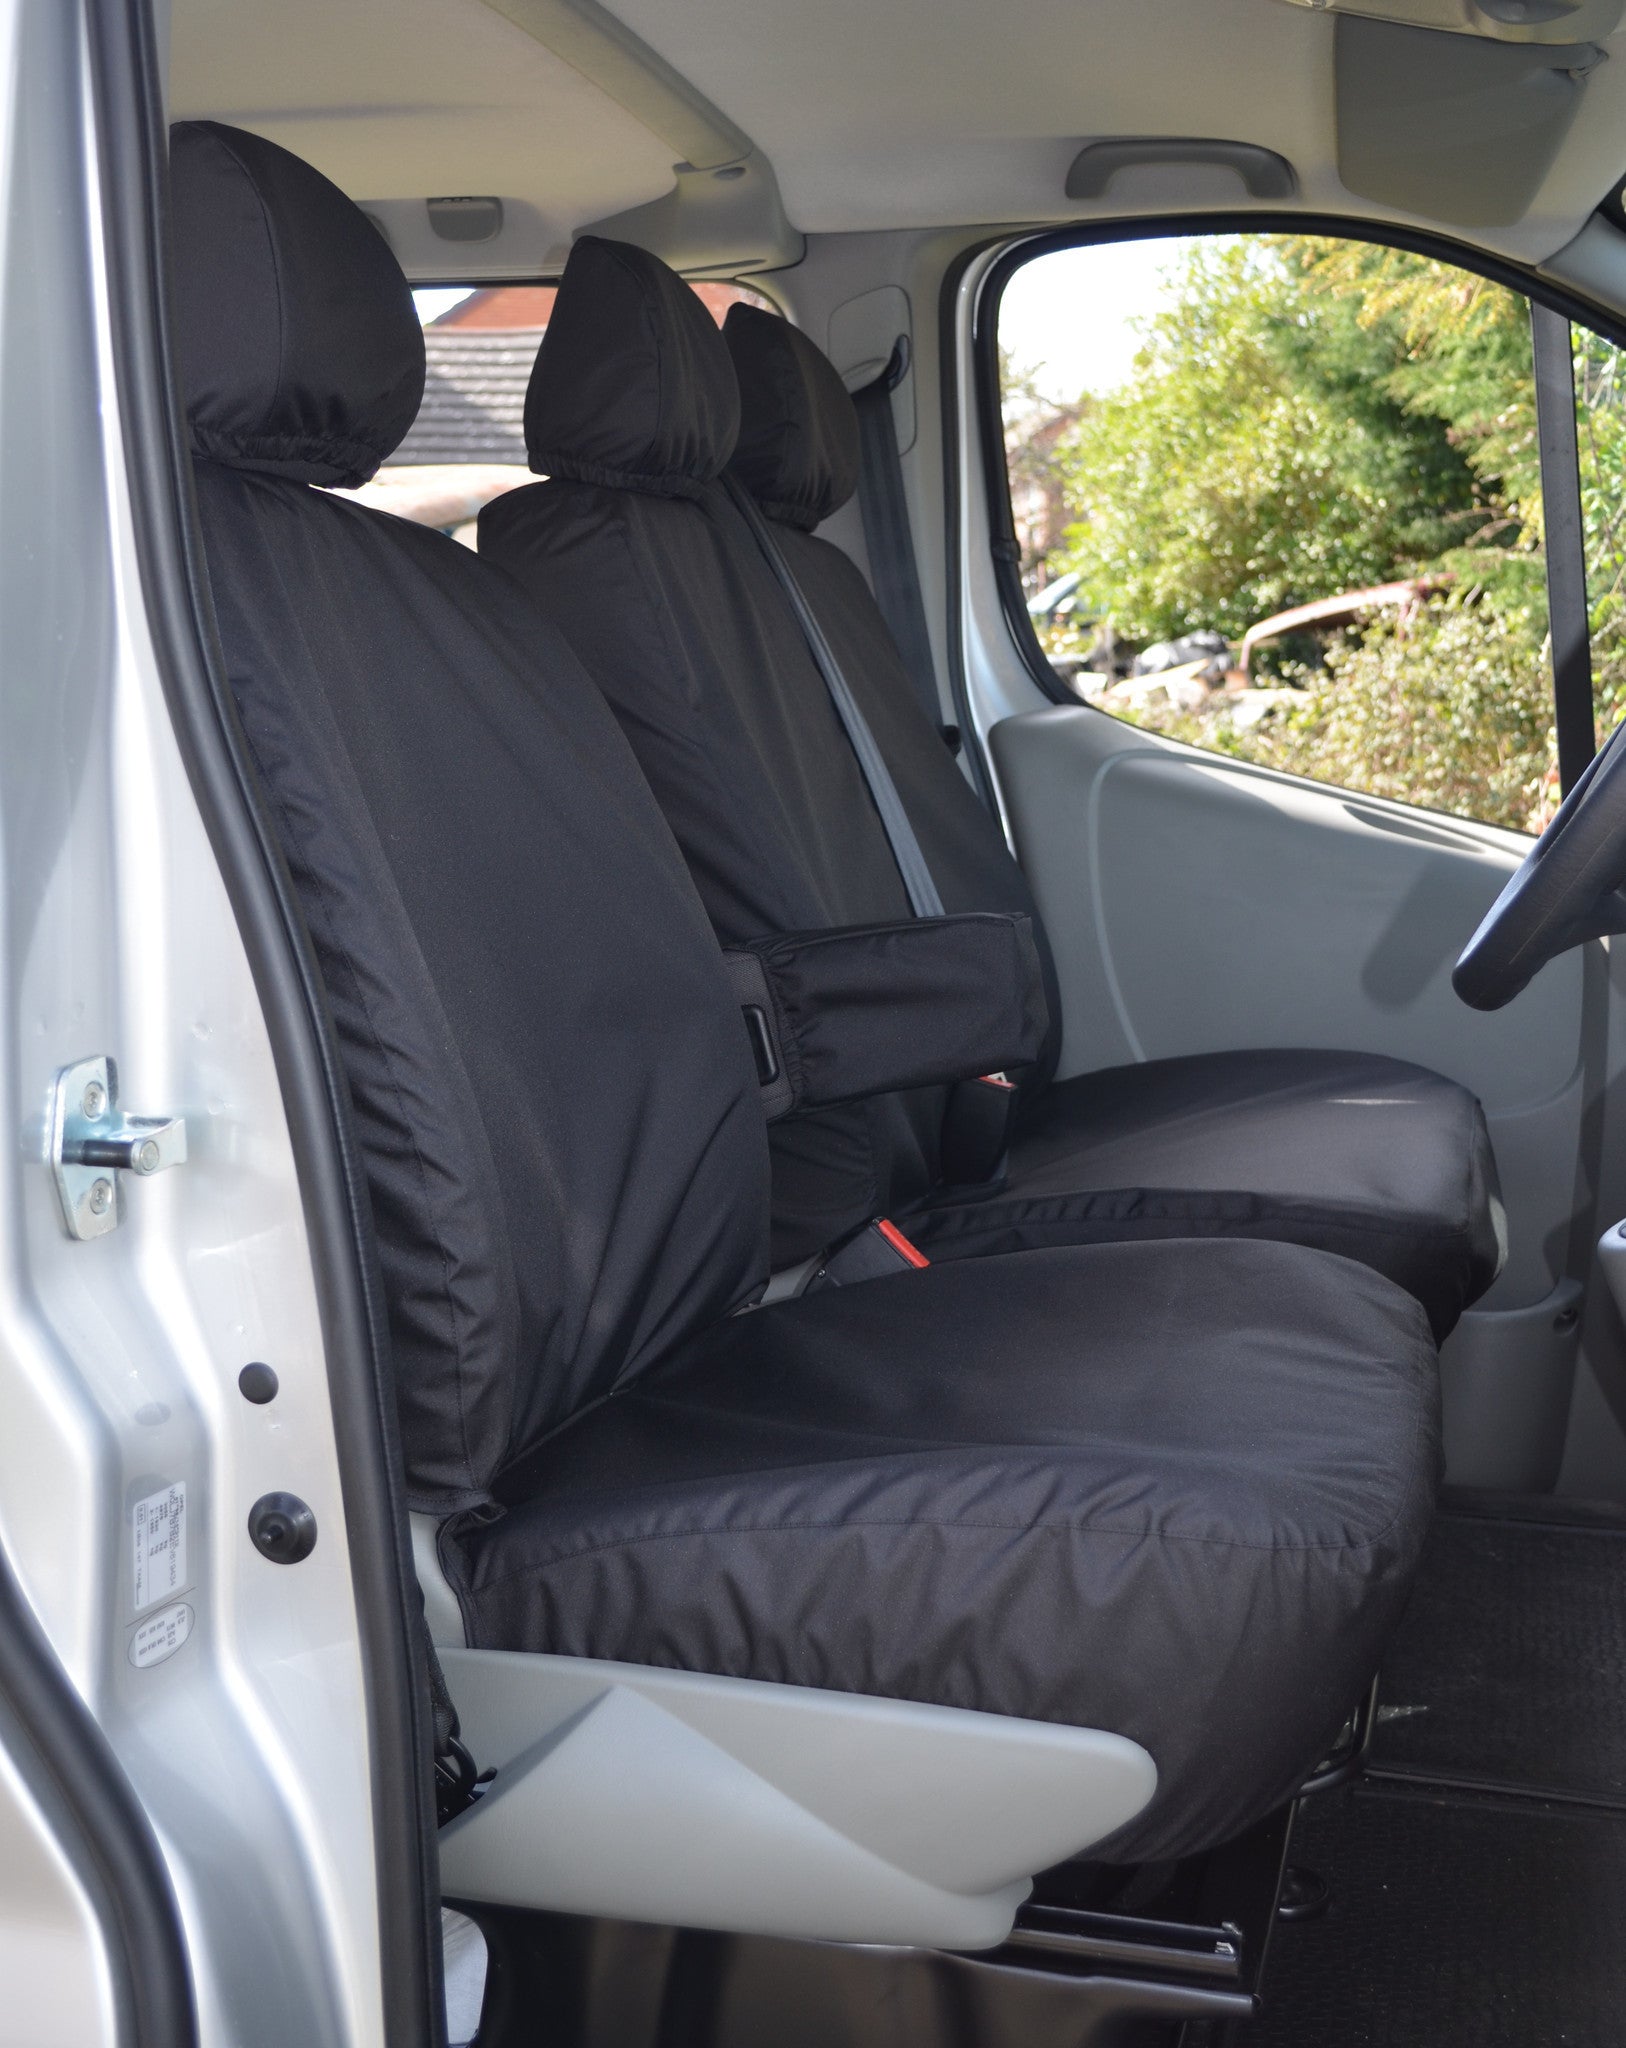 Renault Trafic 2001 - 2006 Tailored Front Seat Covers Black / With Driver's Armrest Turtle Covers Ltd